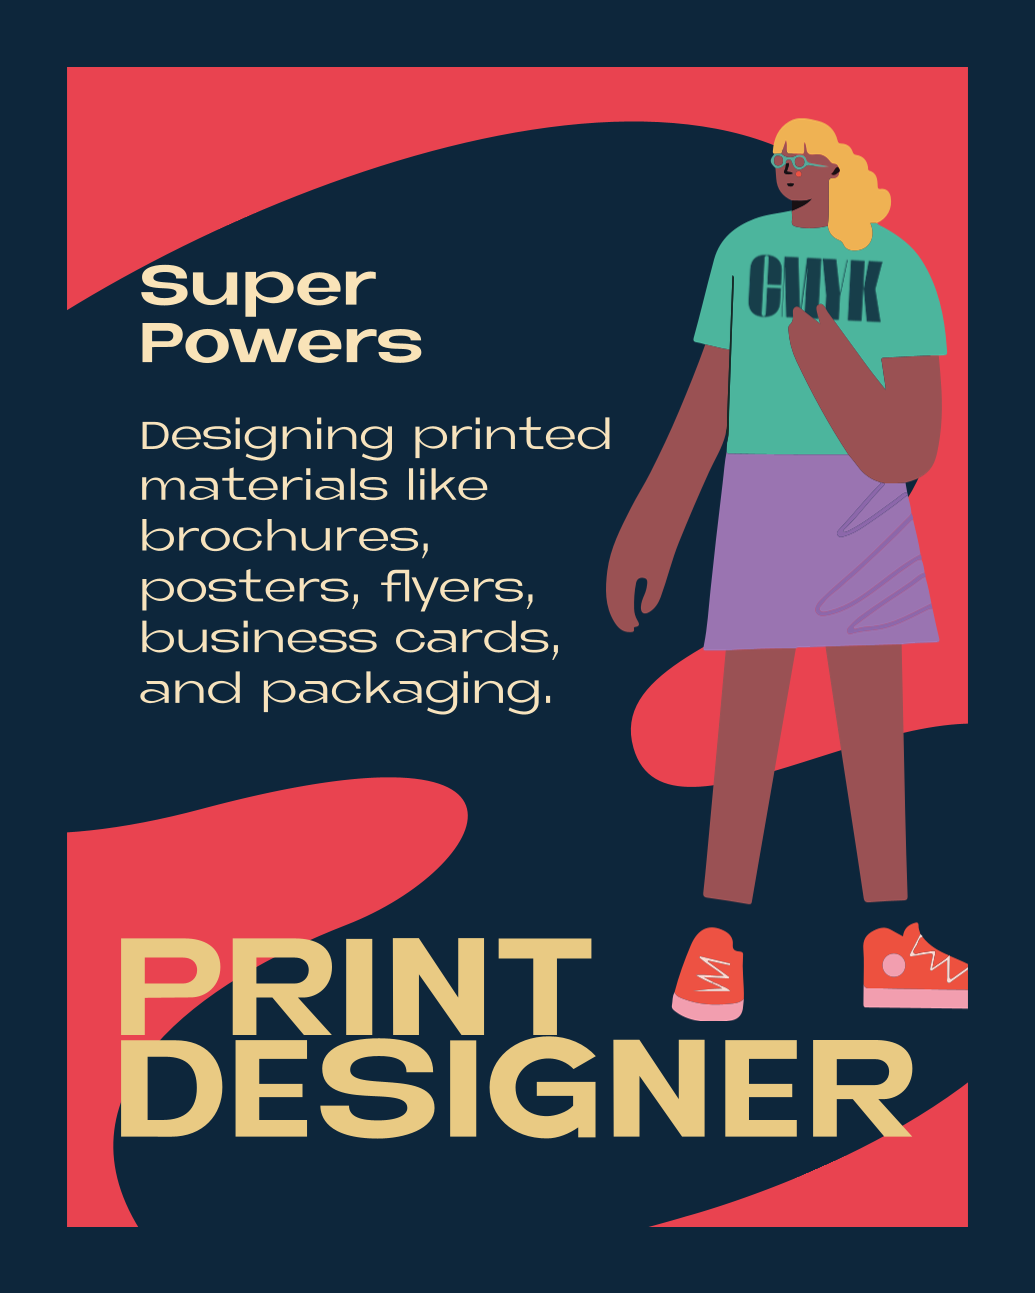 PRINT DESIGNER – Super Powers: Designing printed materials like brochures, posters, flyers, business cards, and packaging.